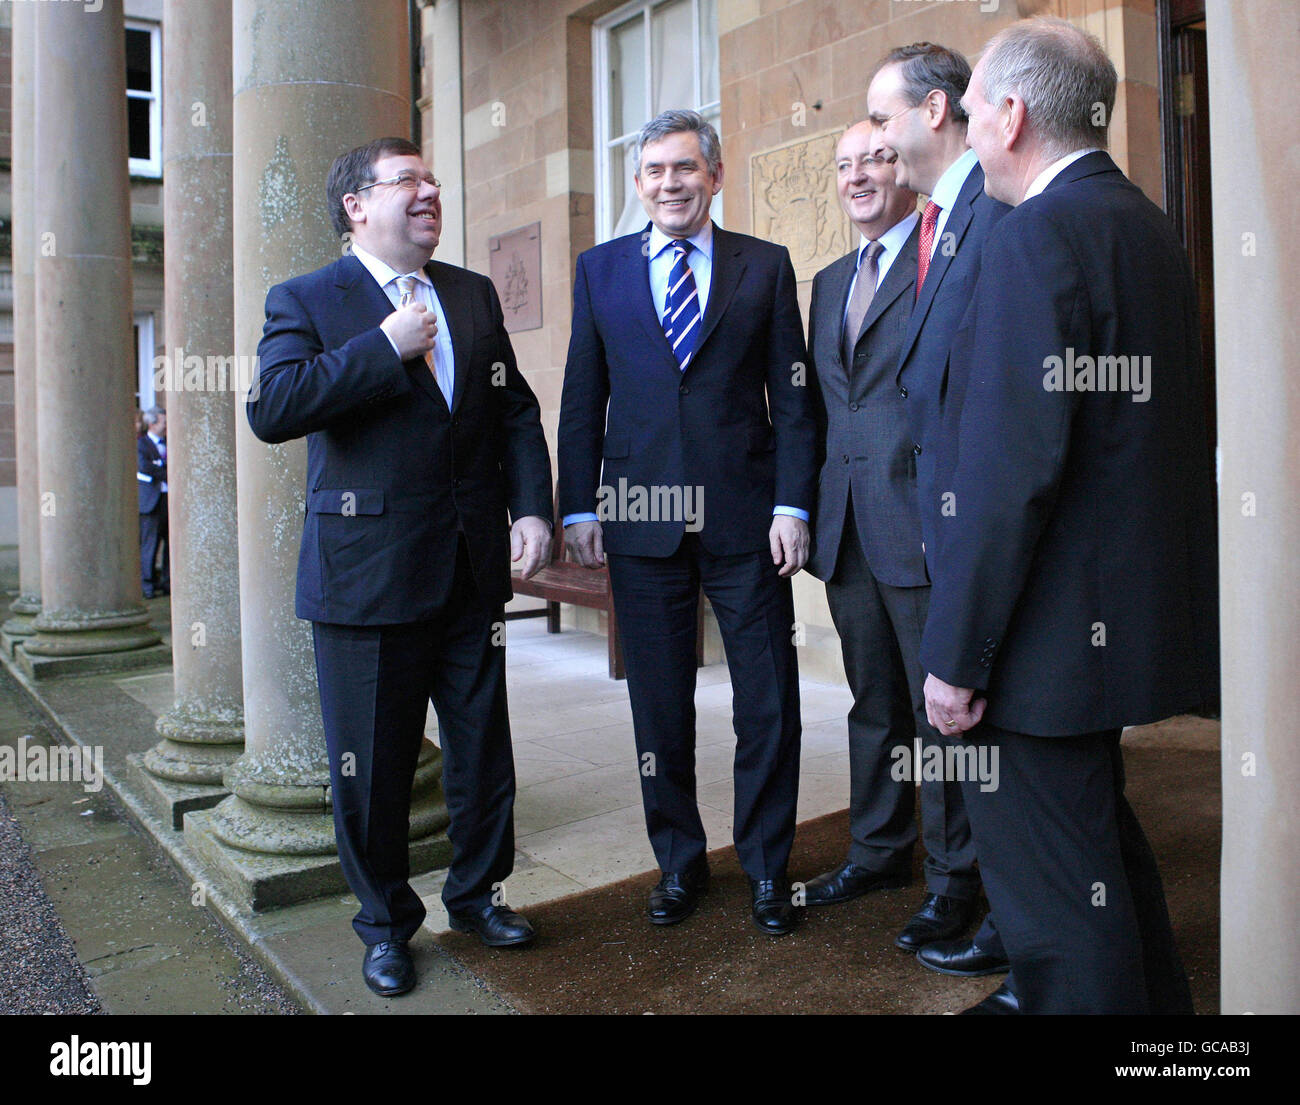 Irish Prime Minister Brian Cowen (left) and Britain's Prime Minister Gordon Brown (2nd left) are greeted by Secretary of State for Northern Ireland Shawn Woodward (3rd right), Irish Foreign Affairs Minster Michael Martin (2nd right) and Northern Ireland Security Minister Paul Goggins (right) at Hillsborough Castle in Hillsborough, Northern Ireland. Stock Photo